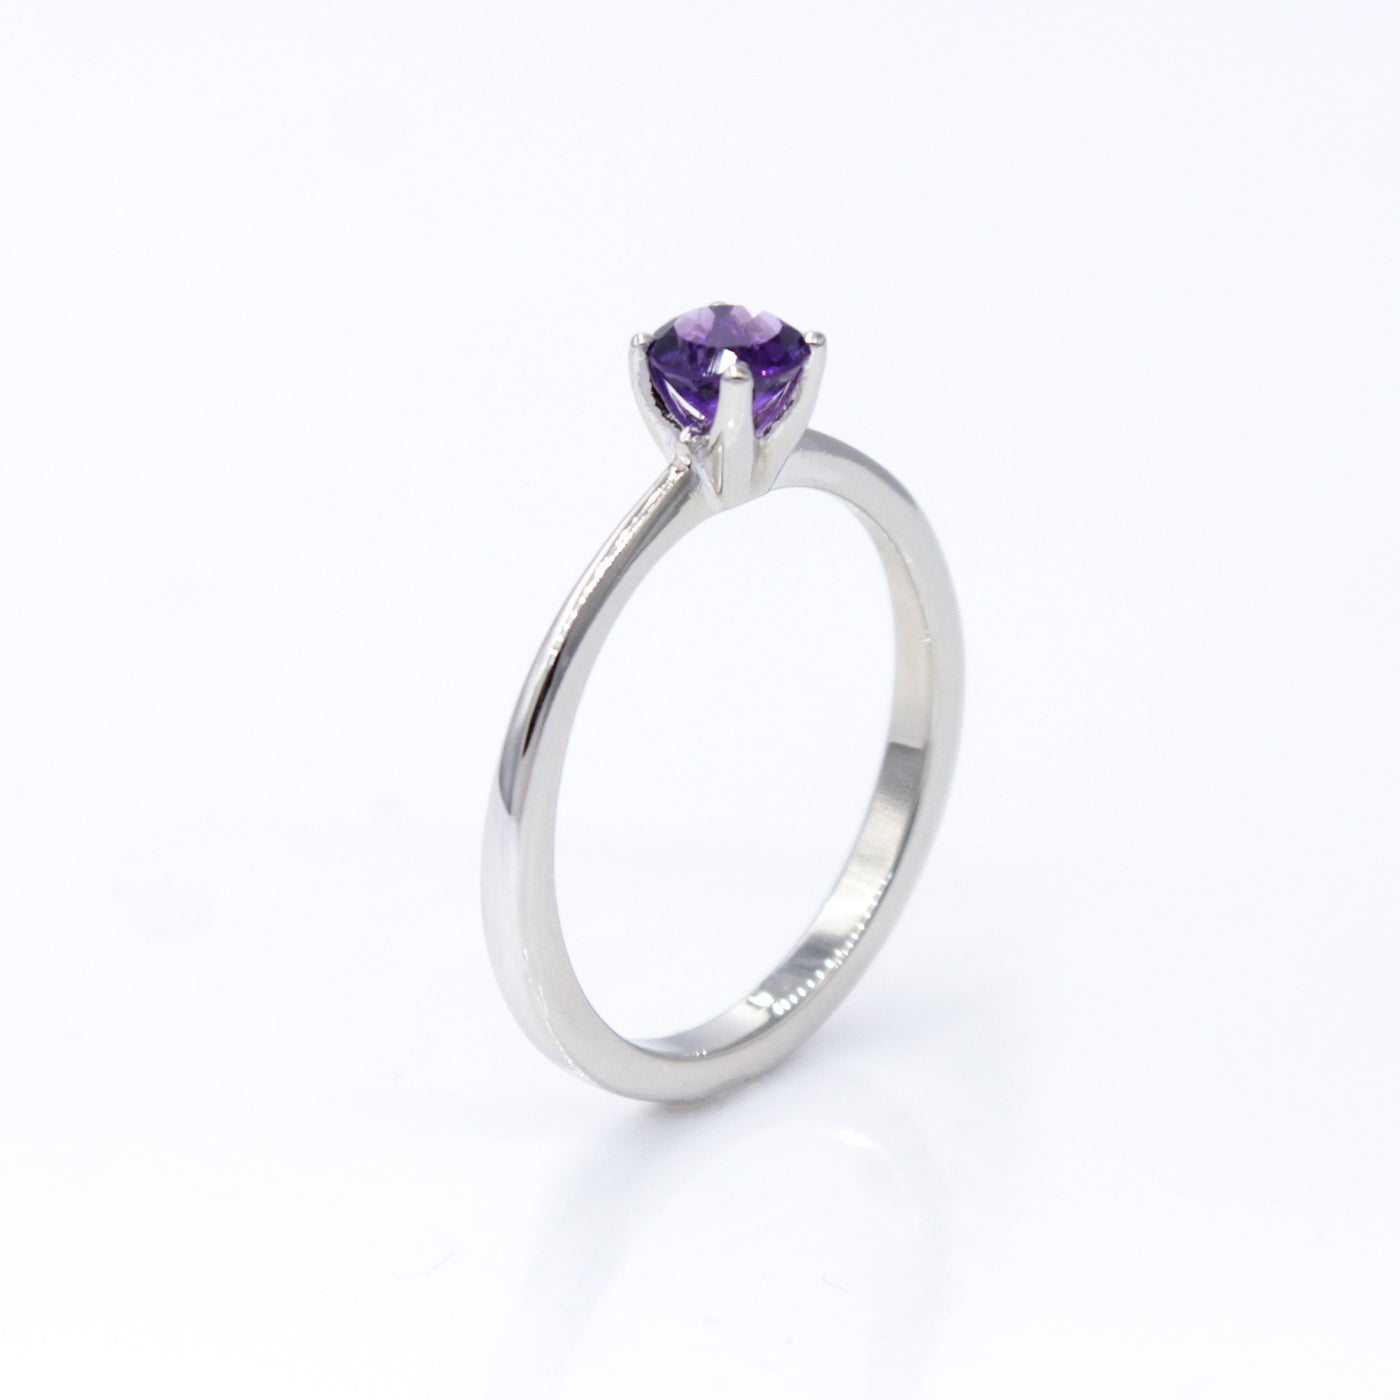 14K White Gold Knife Edge Solitaire Engagement Ring with Purple Sapphire